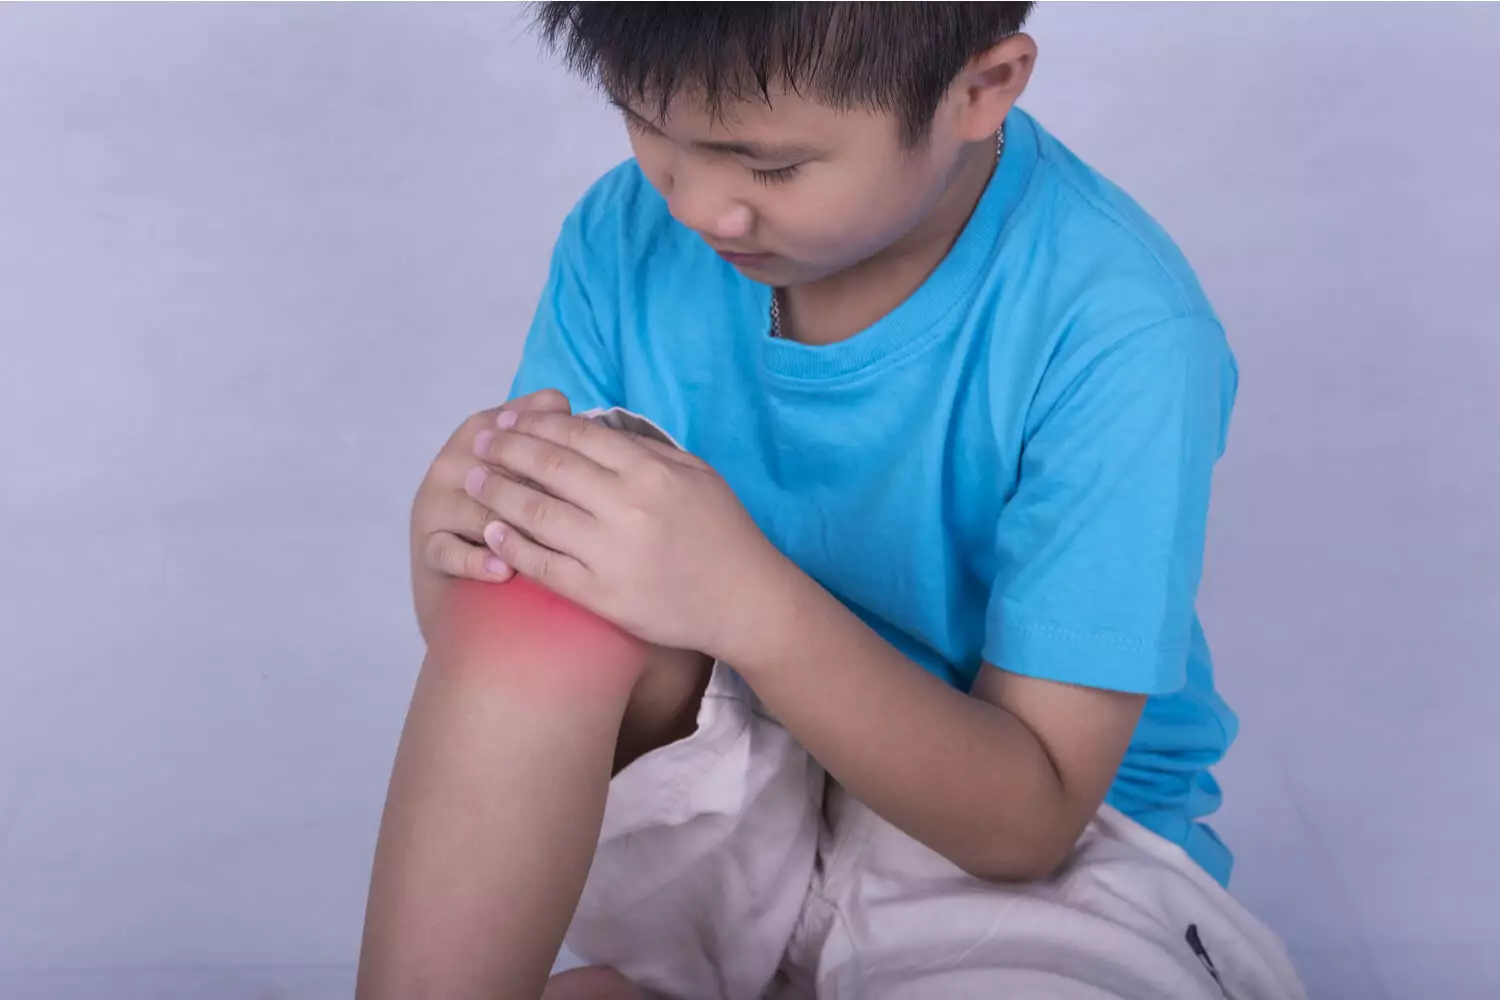 Joint Pains in Children: Should I Consult a Ped Rheumatologist or an Orthopedician? by Dr. Sagar Bhattad